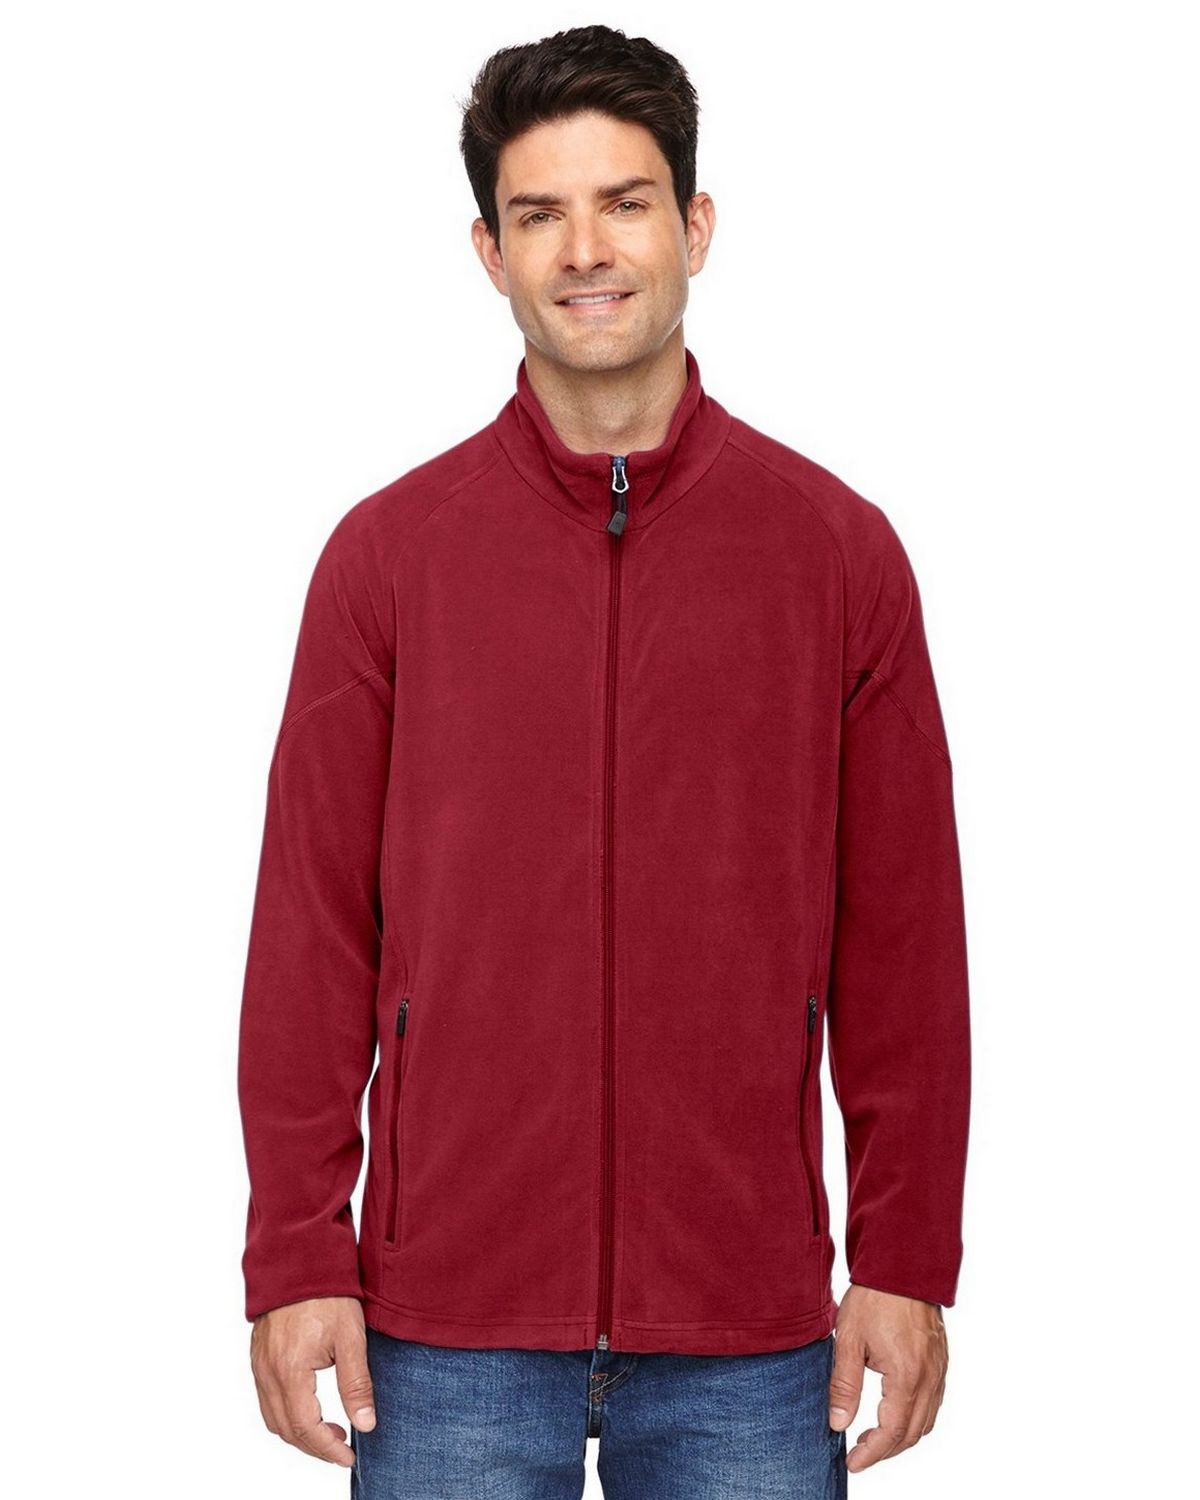 North End 88095 Mens Microfleece Unlined Jacket - ApparelnBags.com